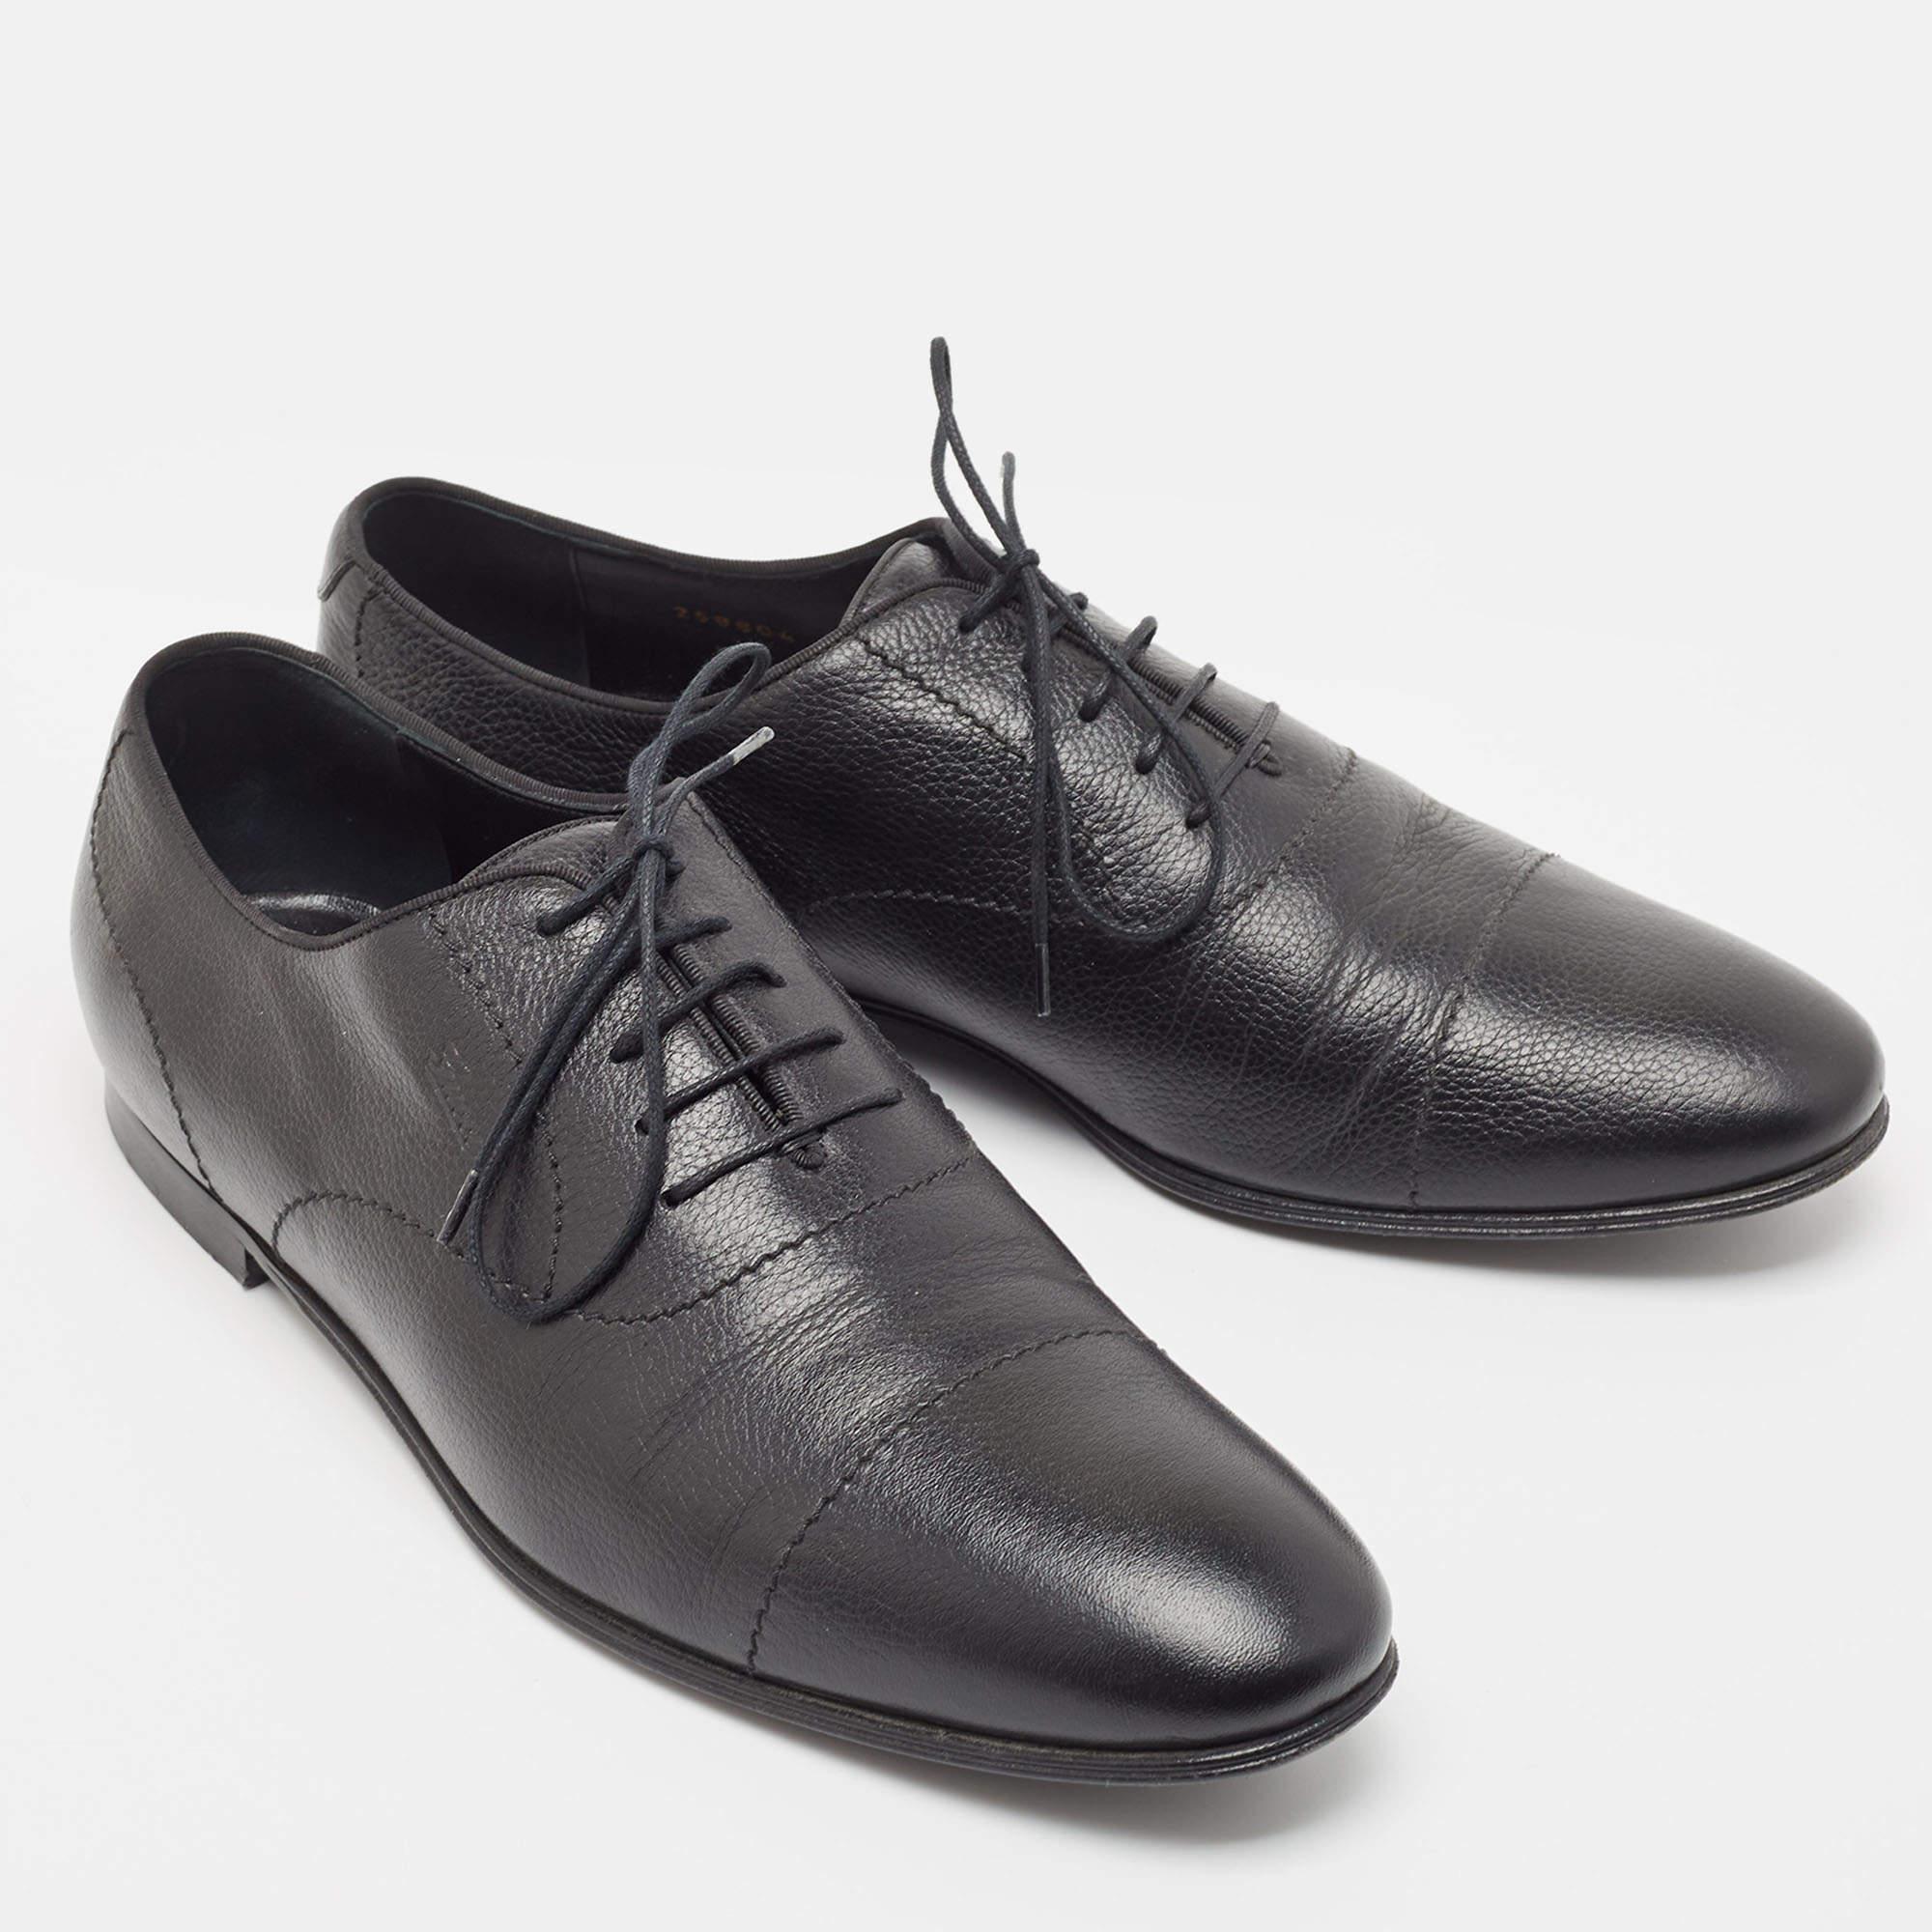 Gucci Black Leather Lace Up Oxfords Size 43 For Sale 1